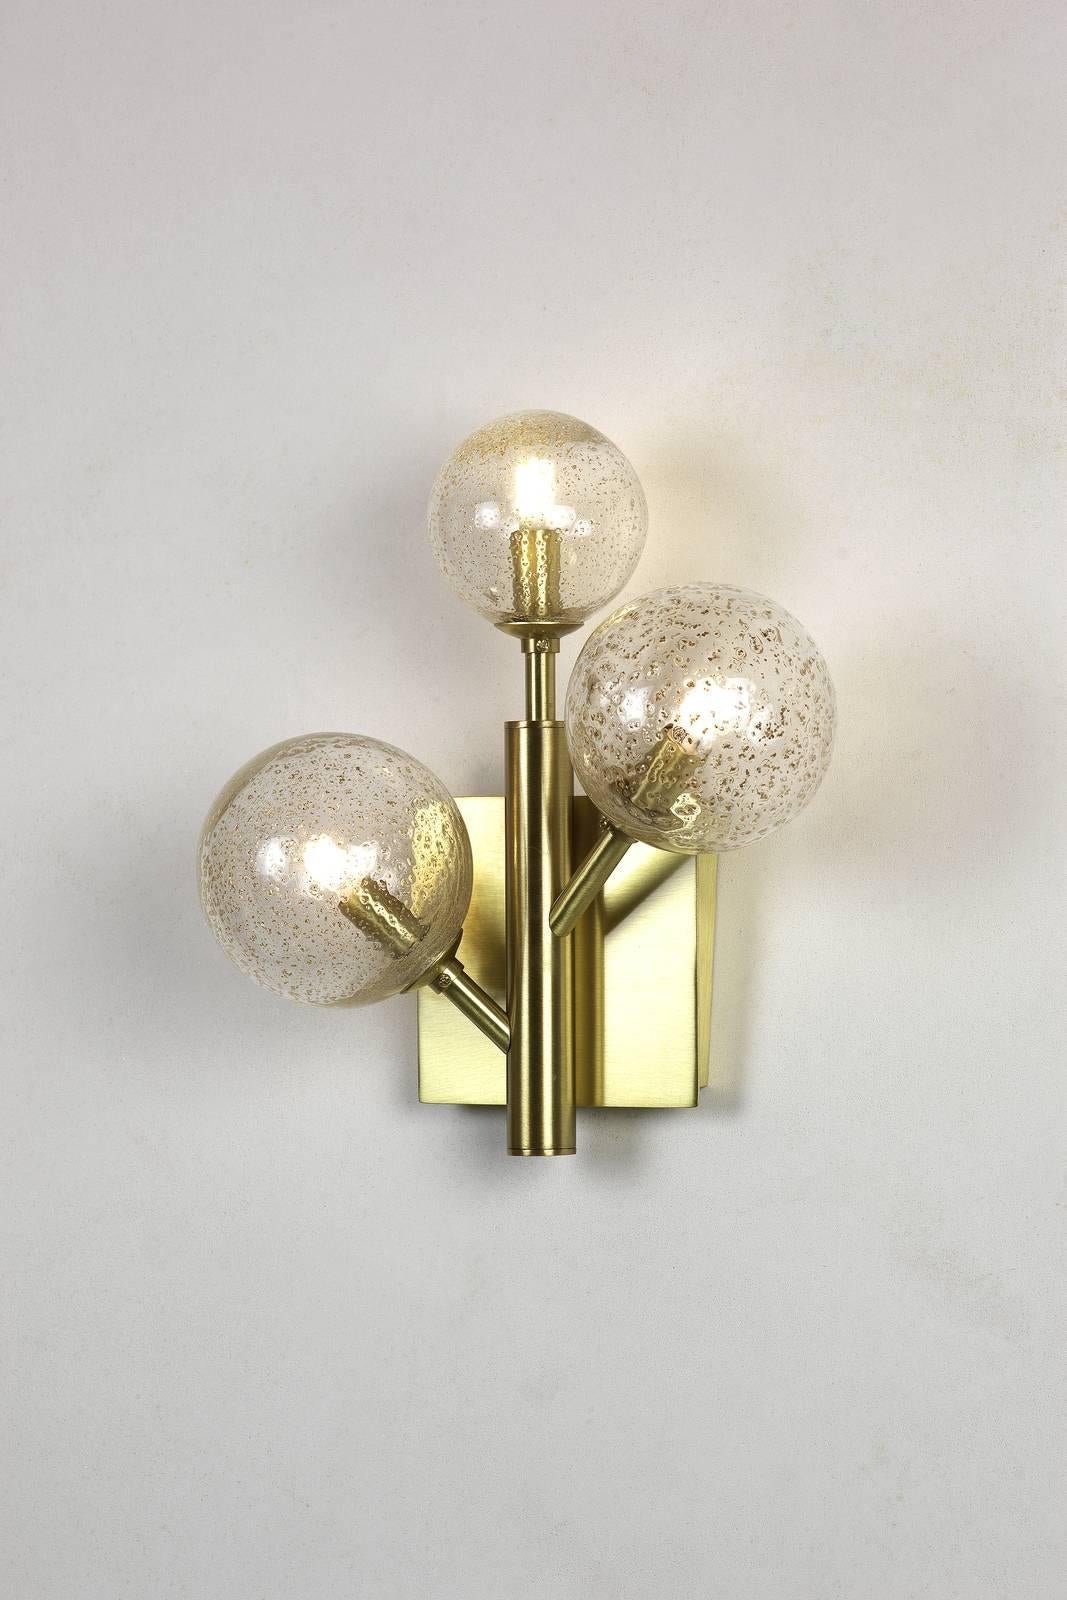 Entirely handcrafted in Murano, the lines and globes of this sophisticated sconce designed by Alberto Donà are reminiscent of the mimosa flower from which the collection takes its name. This elegant lighting fixture has a metal structure in the